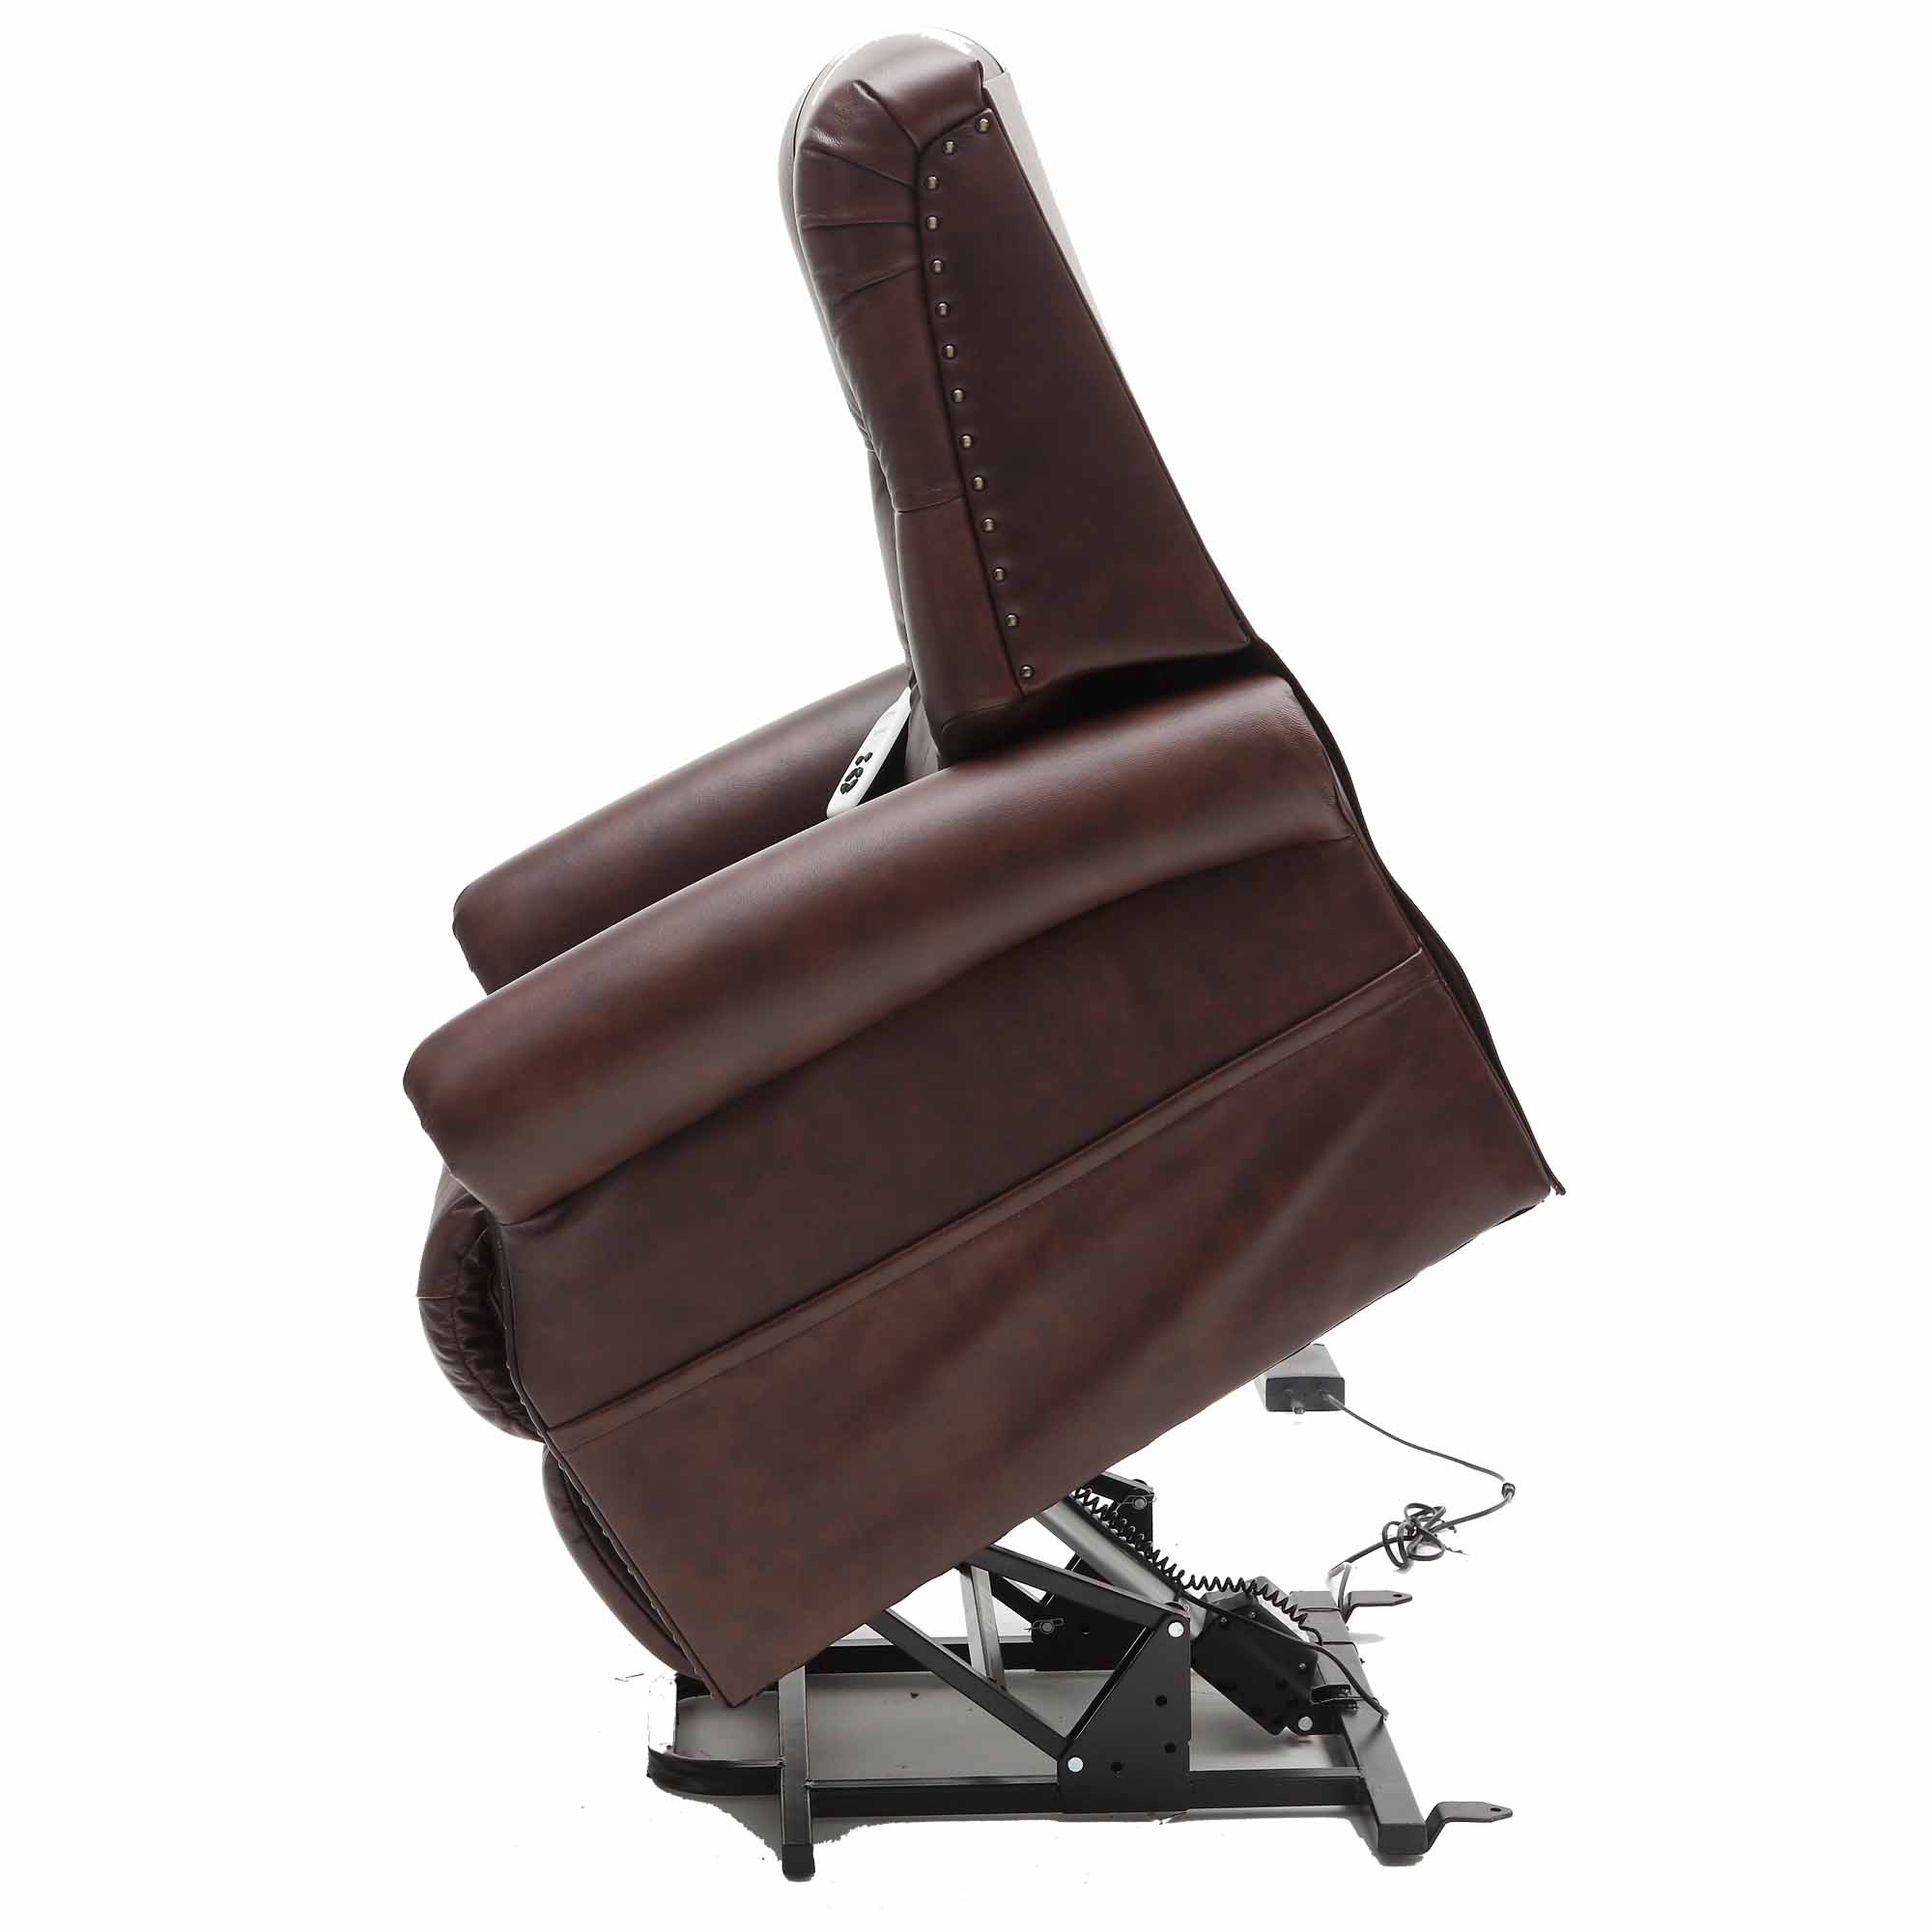 CH4017 Neptune Lift Chair Image